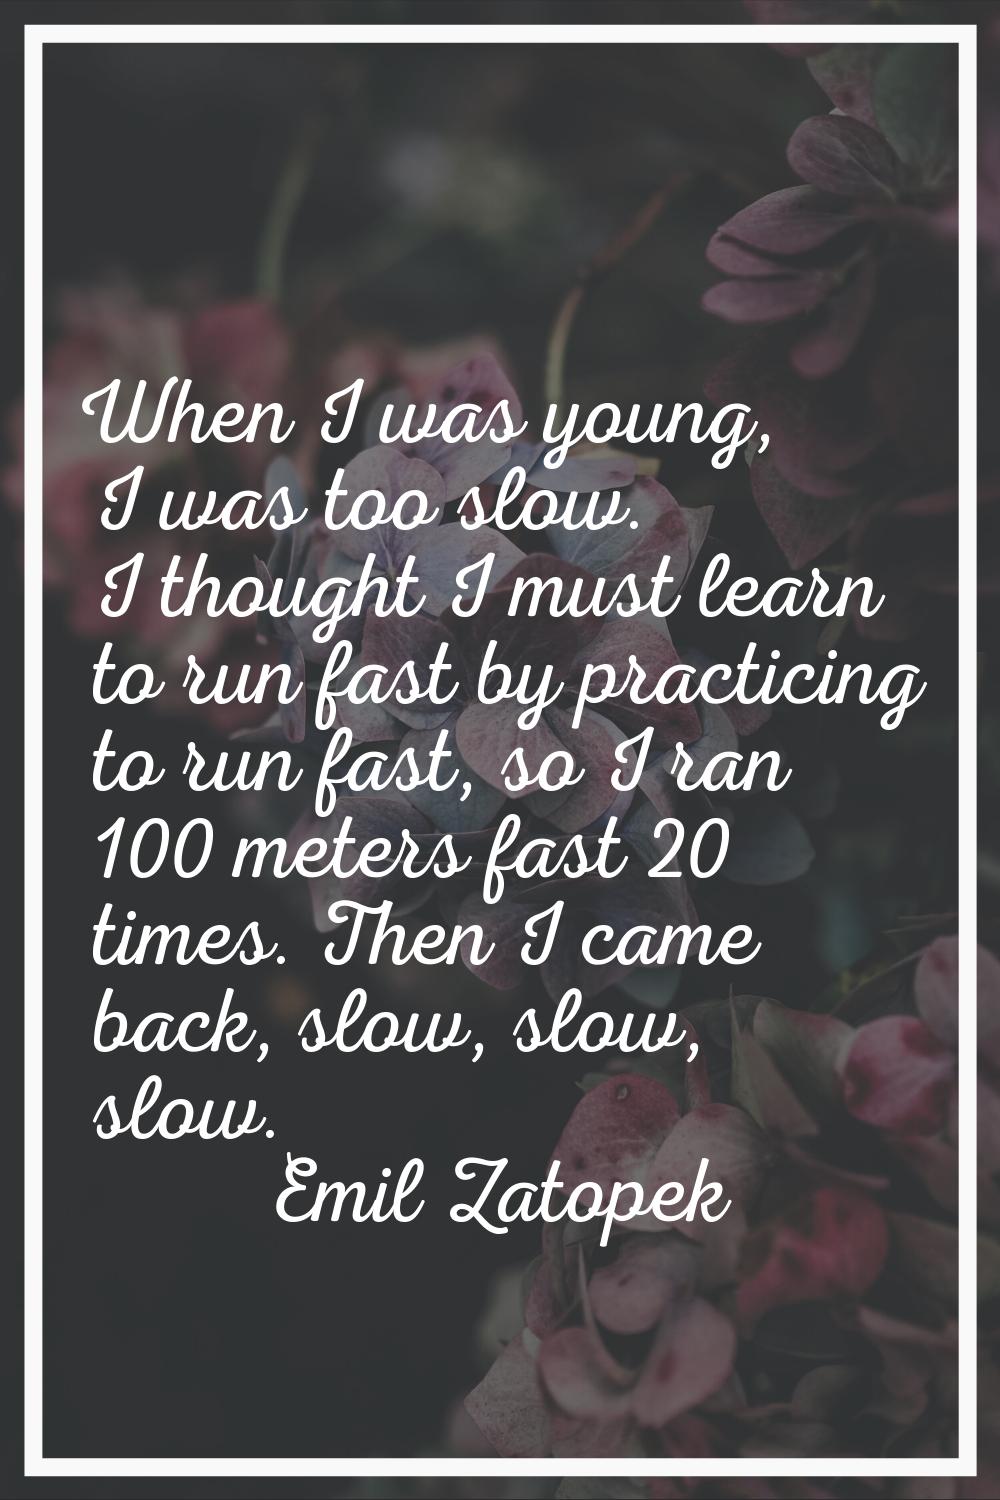 When I was young, I was too slow. I thought I must learn to run fast by practicing to run fast, so 